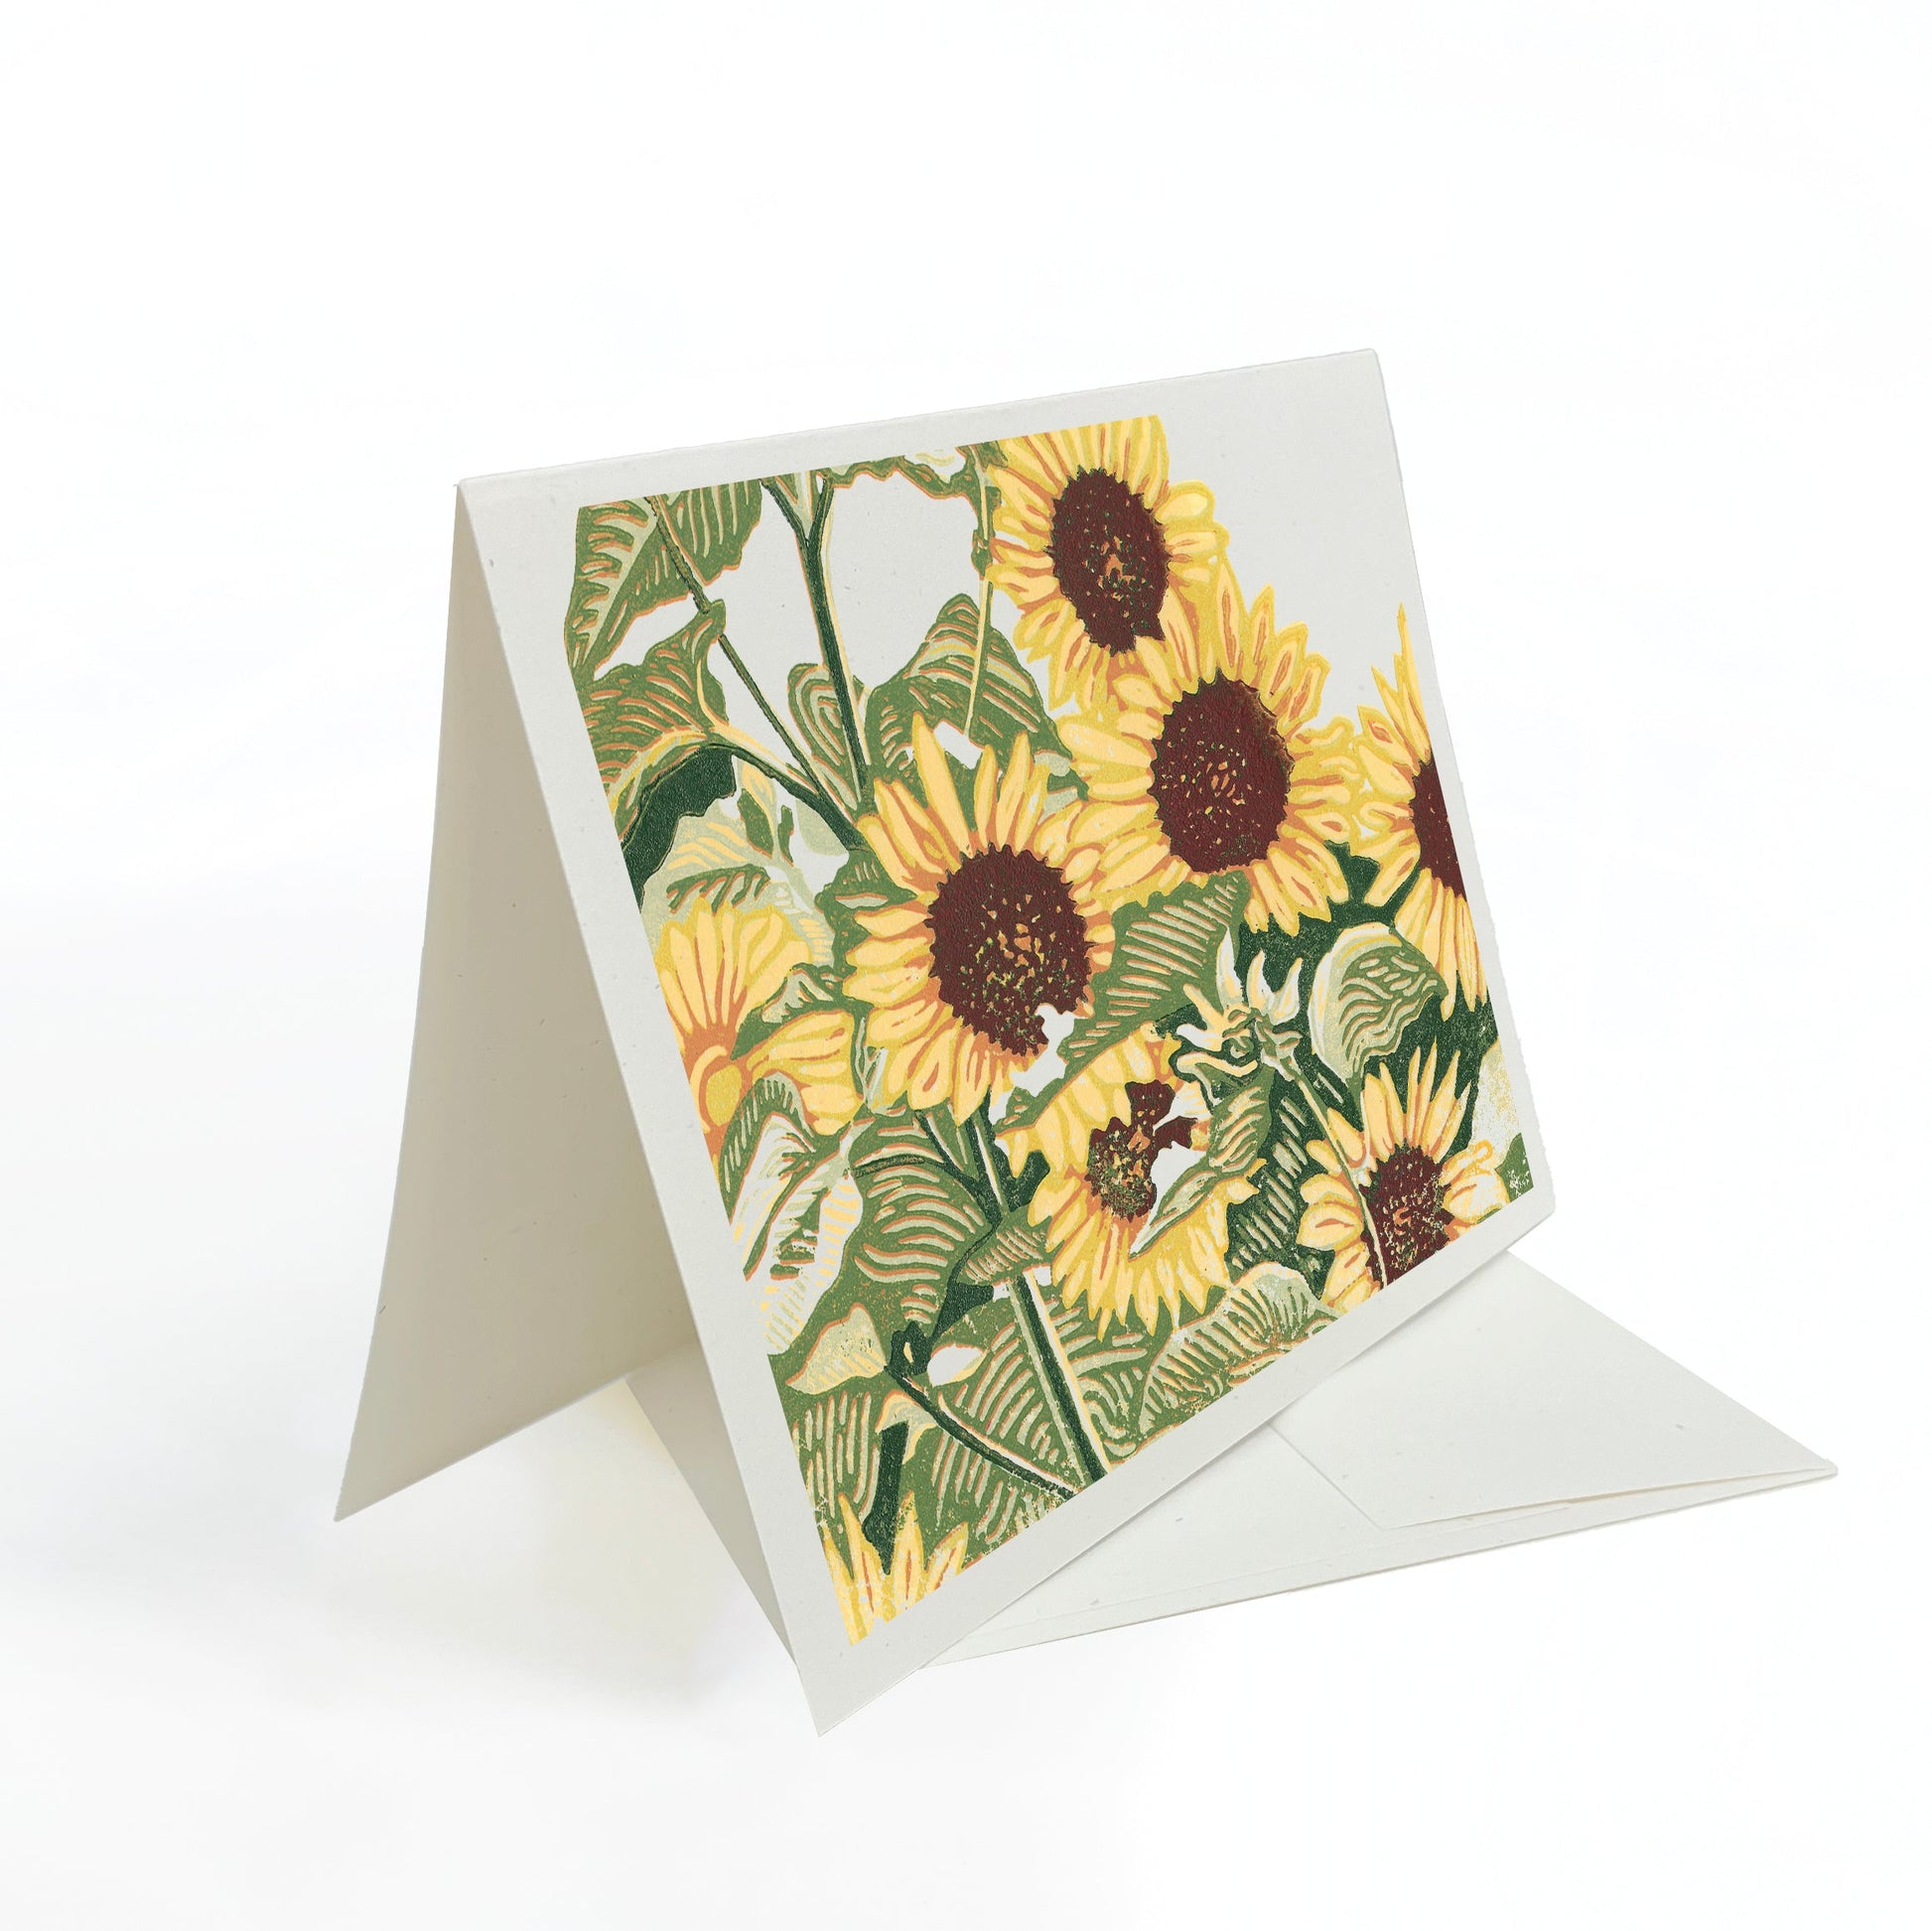 A casually elegant card featuring flower art by Natalia Wohletz of Peninsula Prints titled Sunflower Patch.